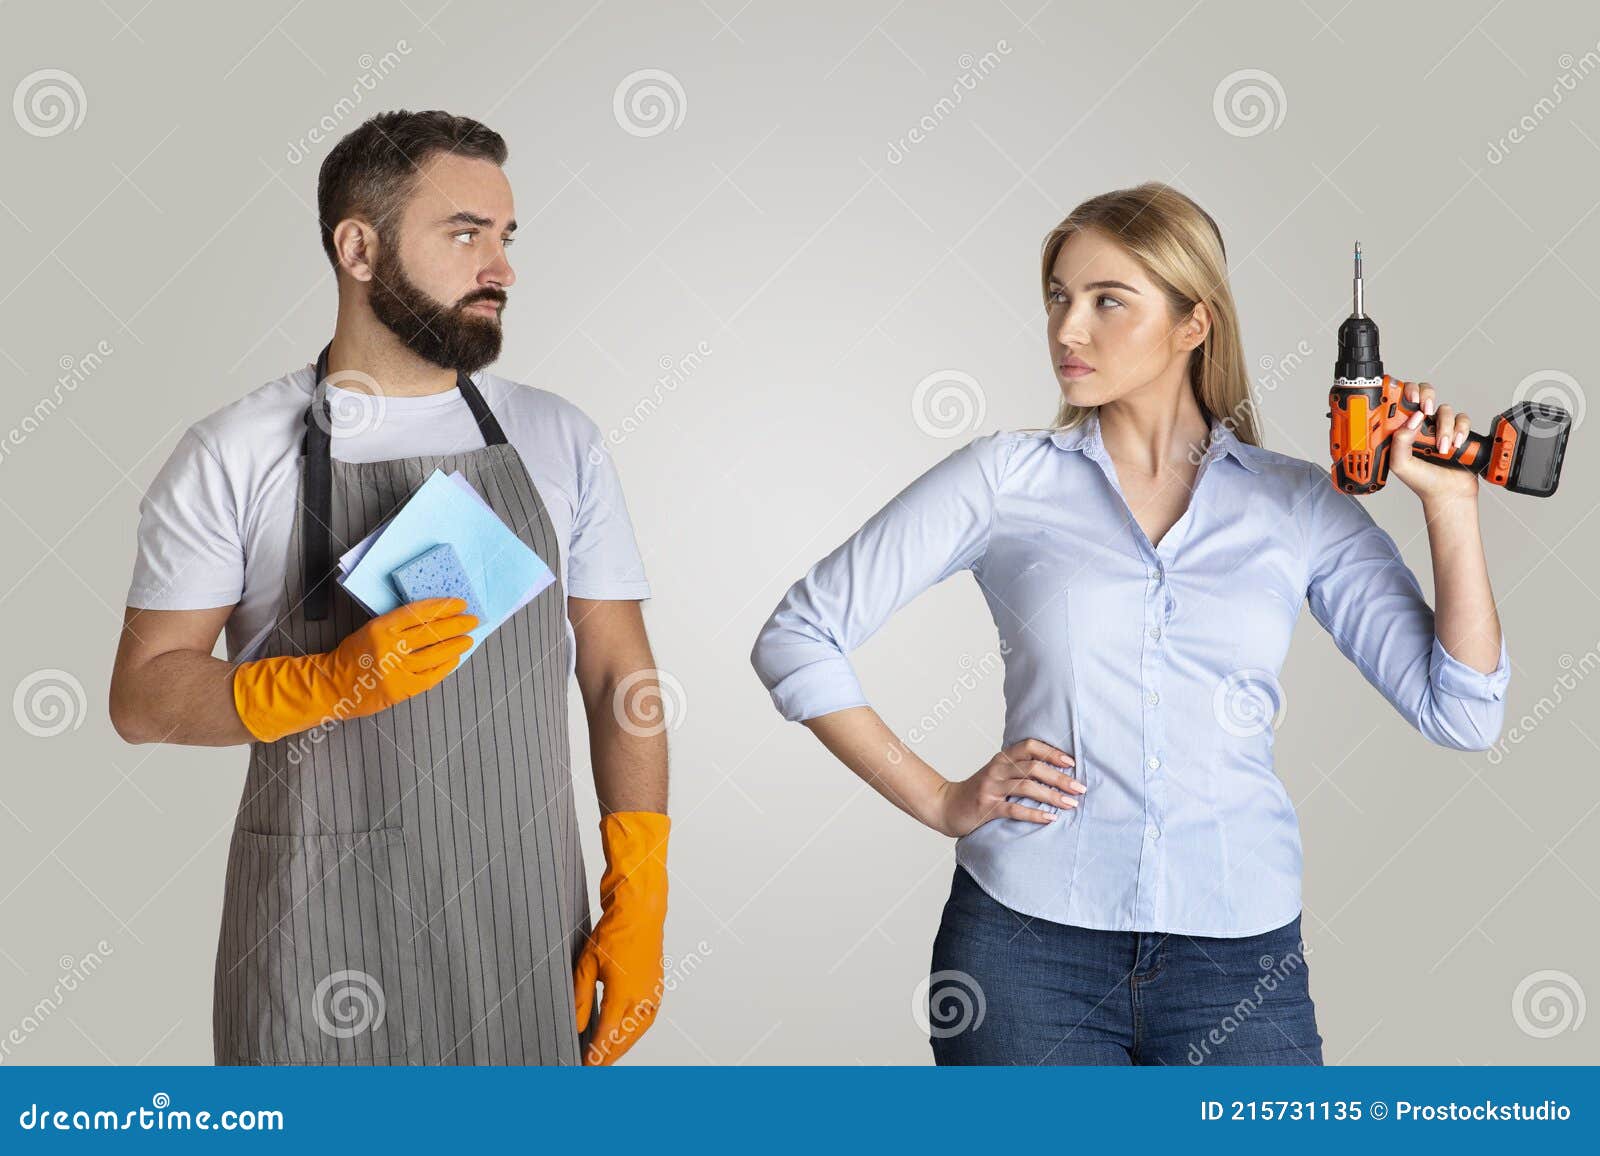 Gender Stereotypes, Gender and Role in Society Stock Image